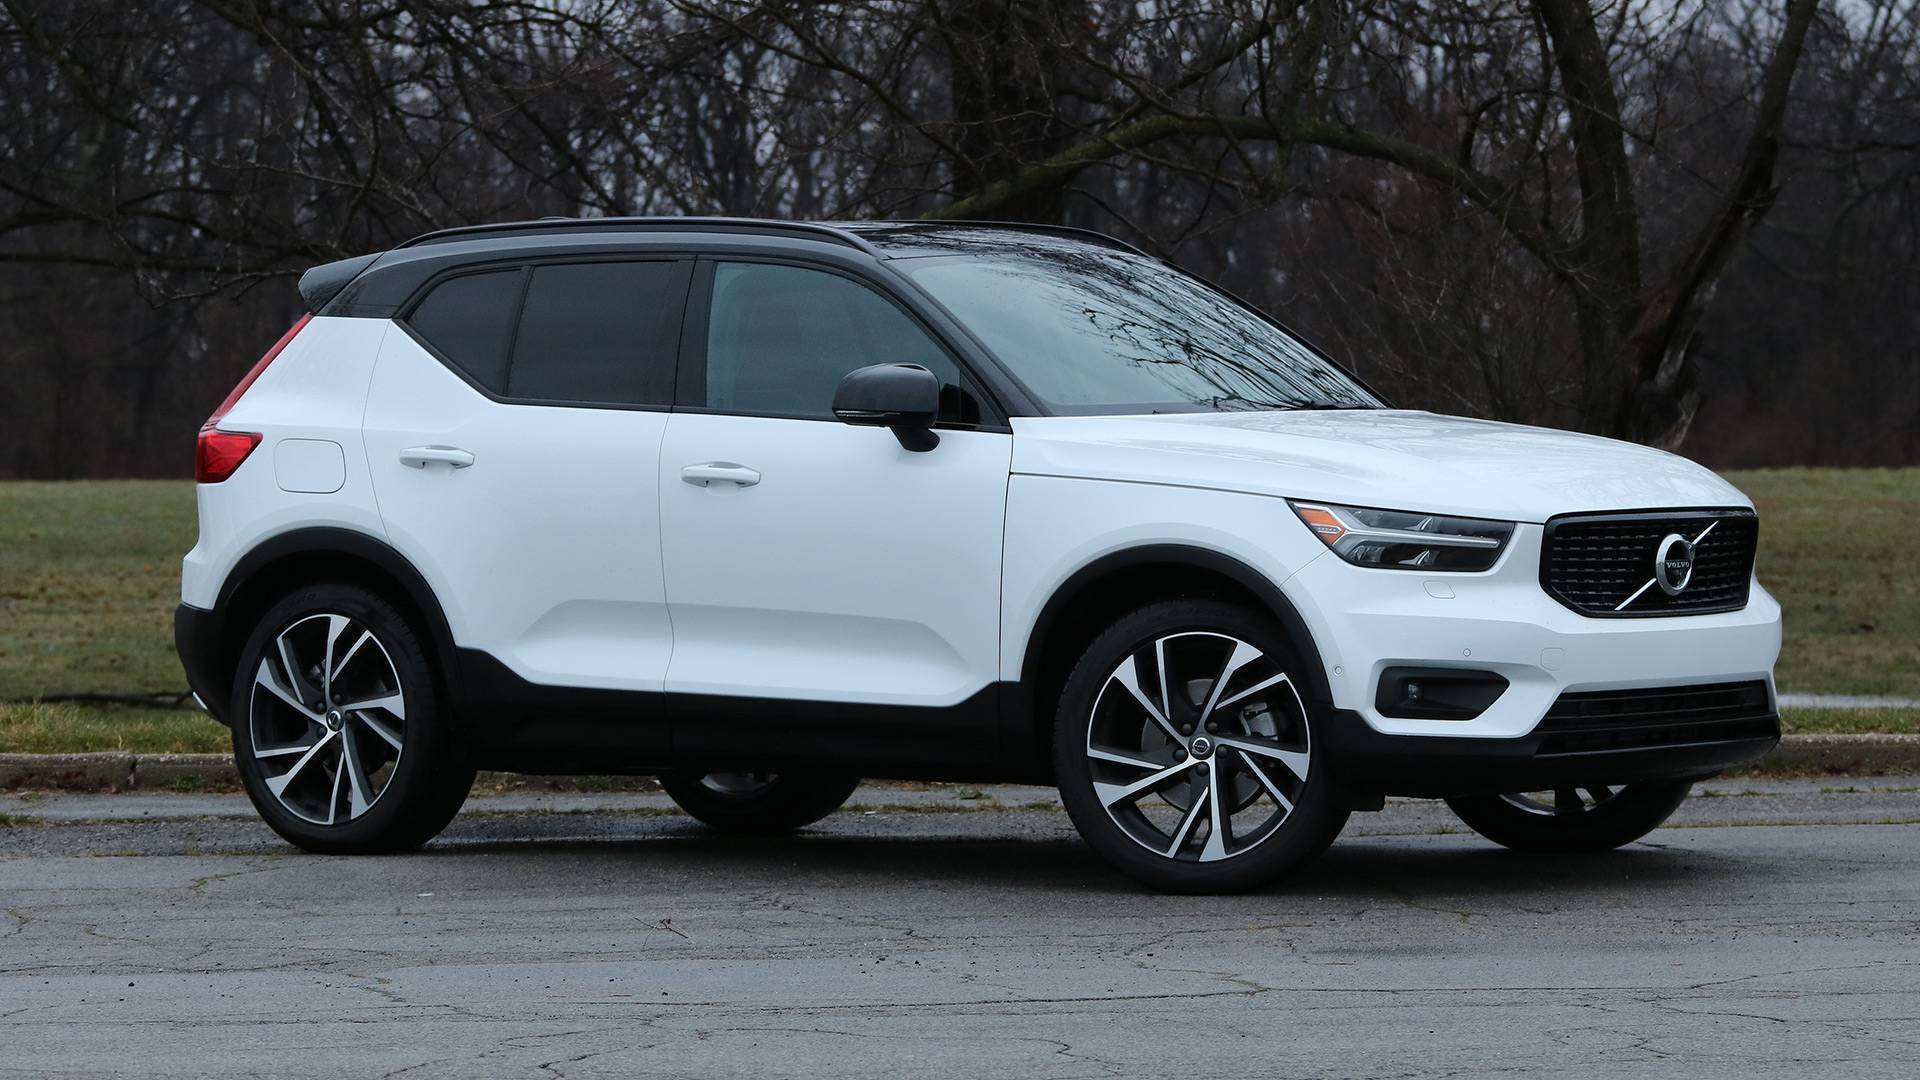 27 The Best 2019 Volvo Xc40 Price Wallpaper , HD Wallpaper & Backgrounds